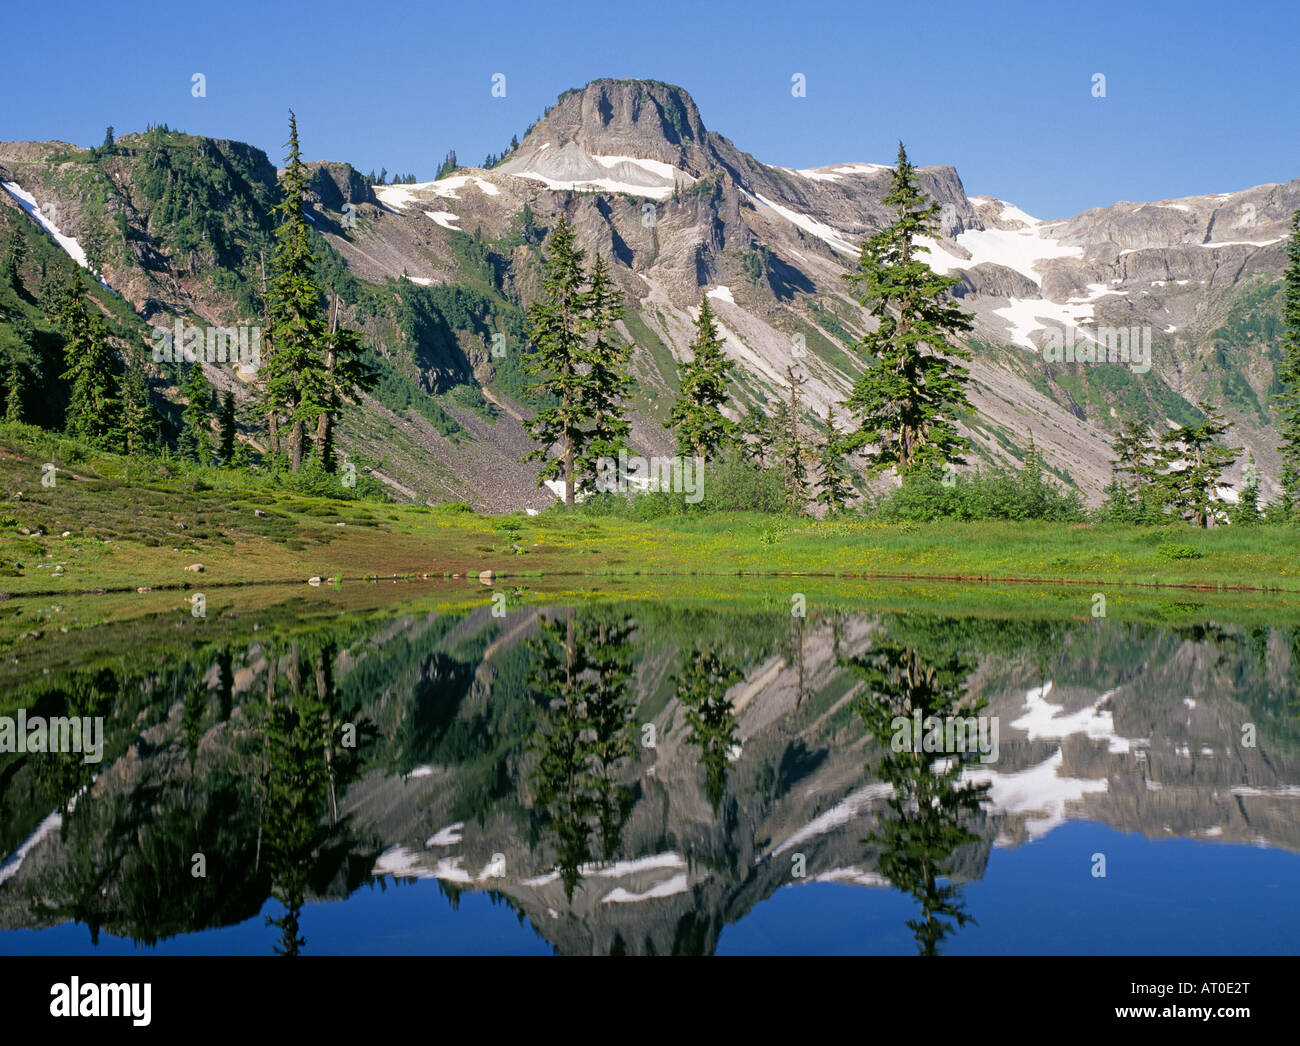 The reflection of the Cascade Mountains in Picture lake in North Cascades National Park, Washington. Stock Photo